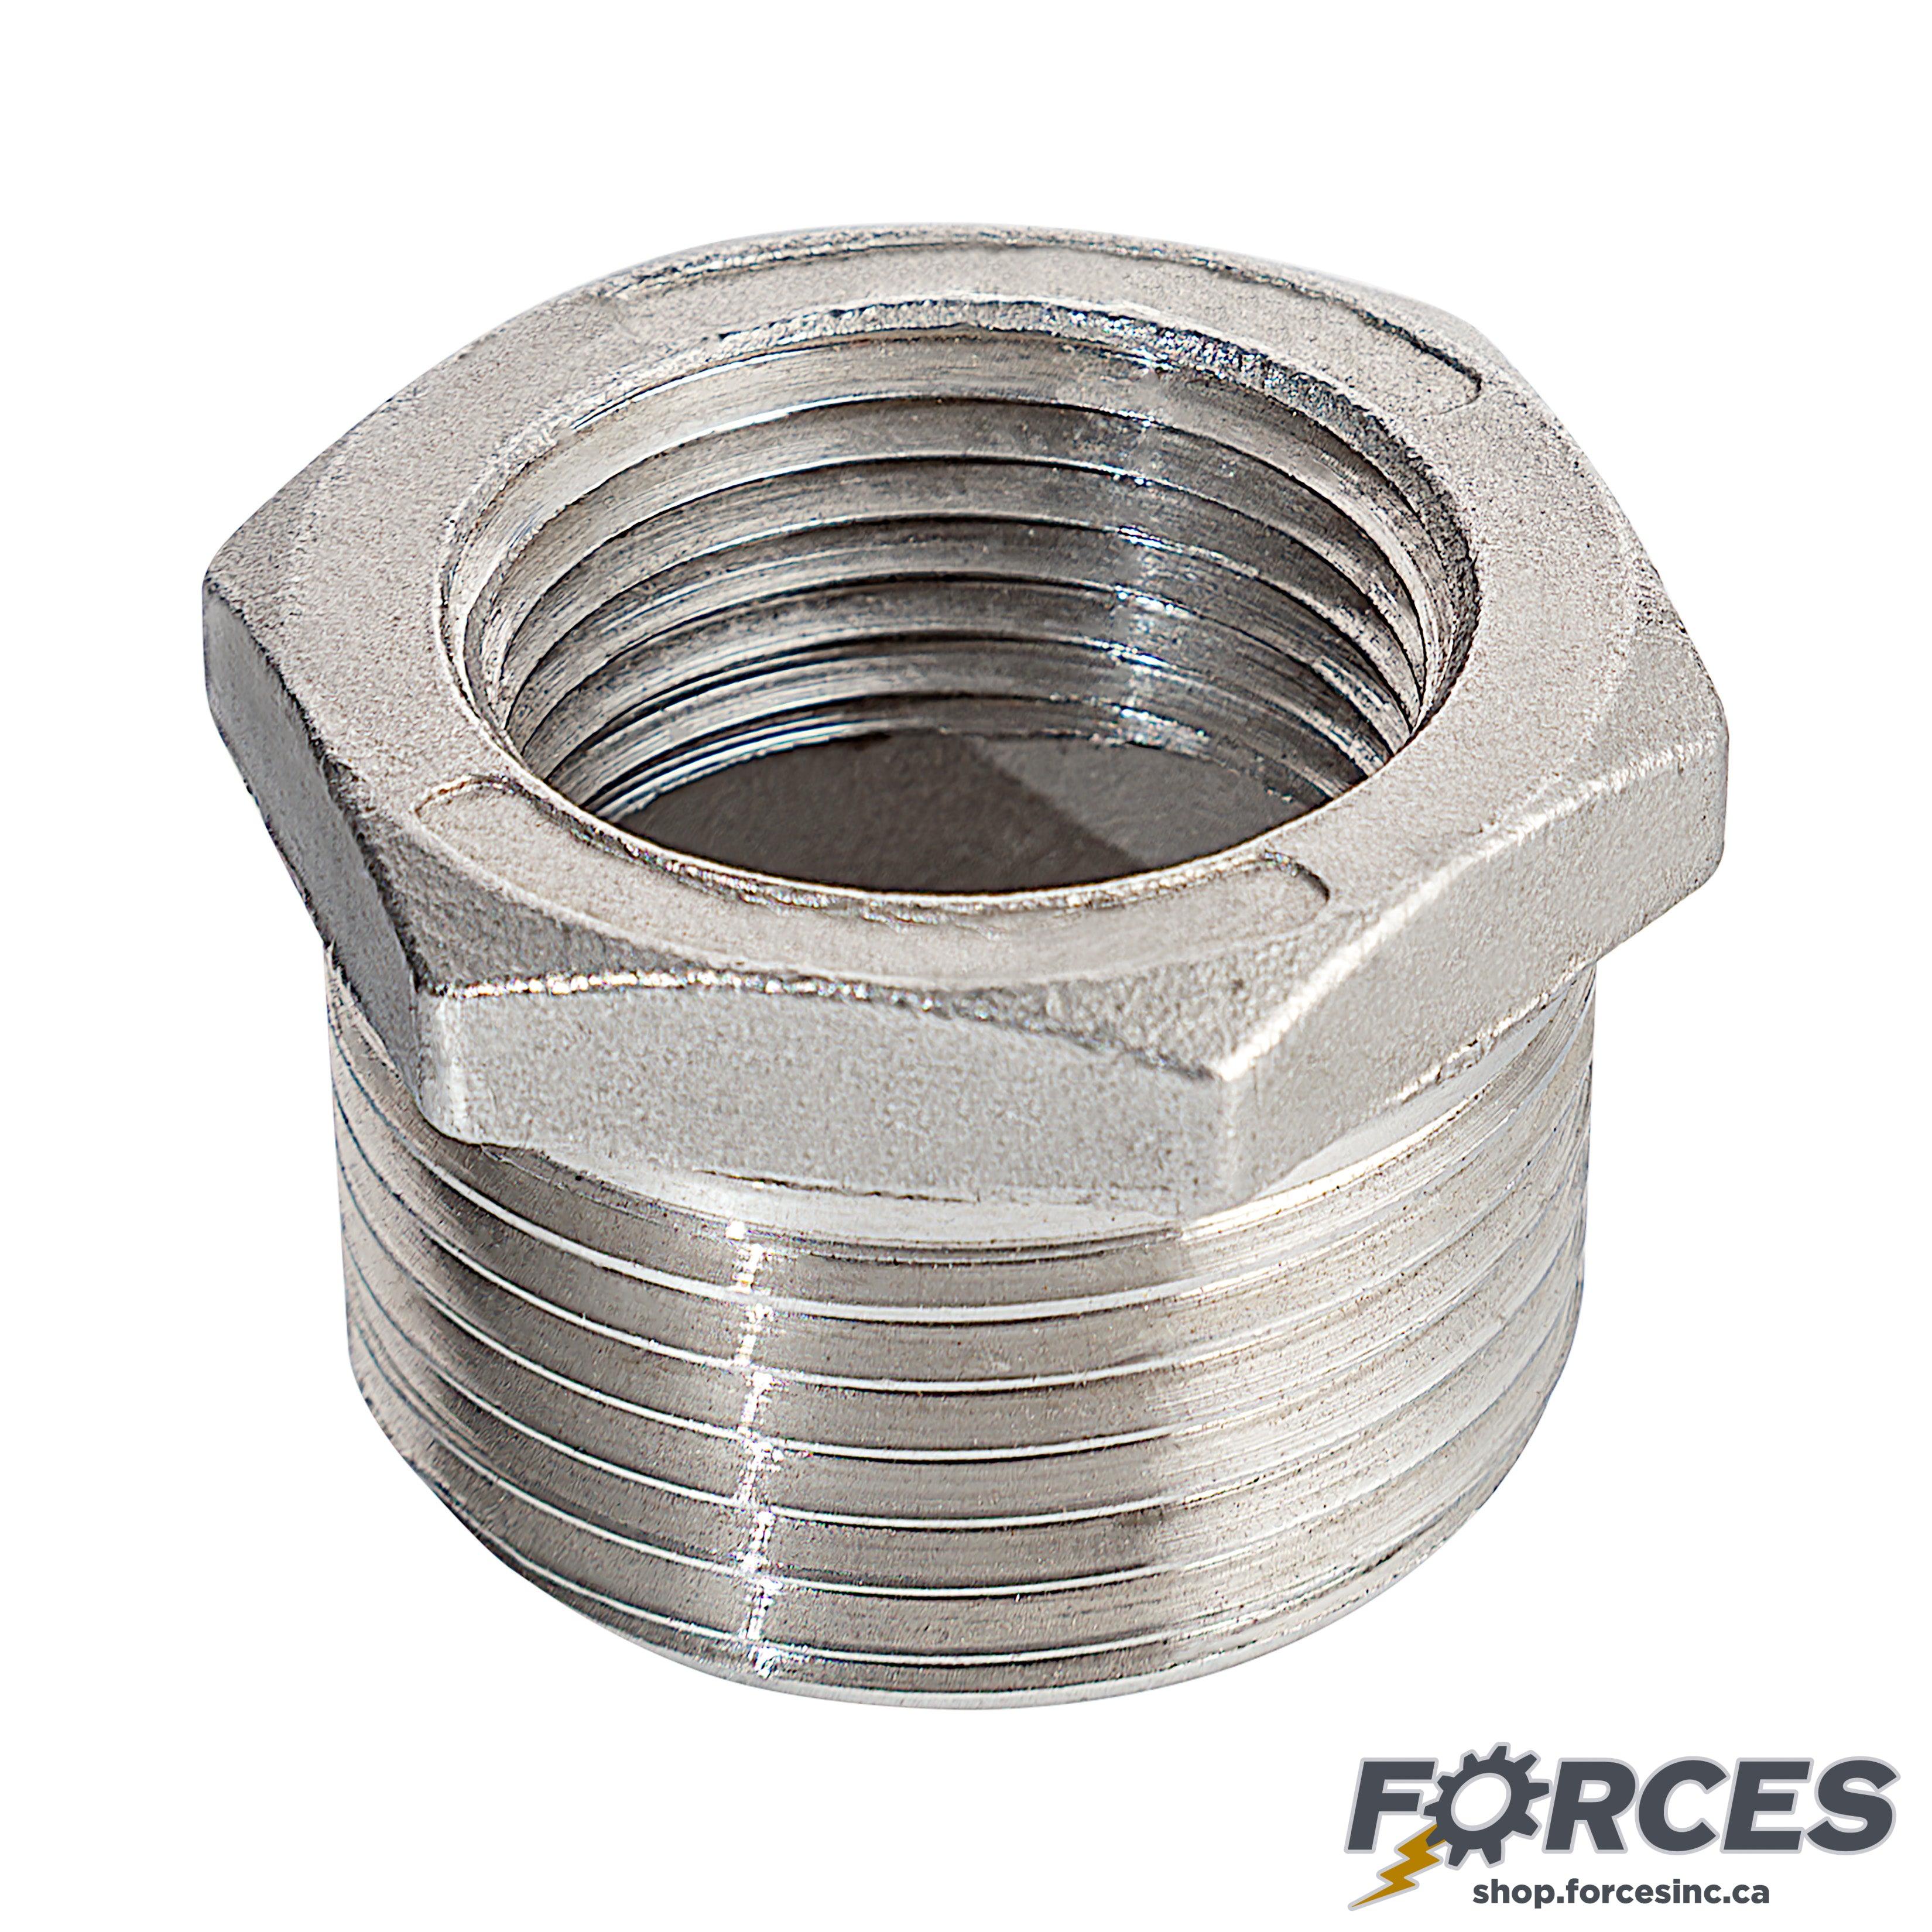 1" (M) x 3/4" (F) Reducing Hex Bushing NPT #150 - Stainless Steel 316 - Forces Inc